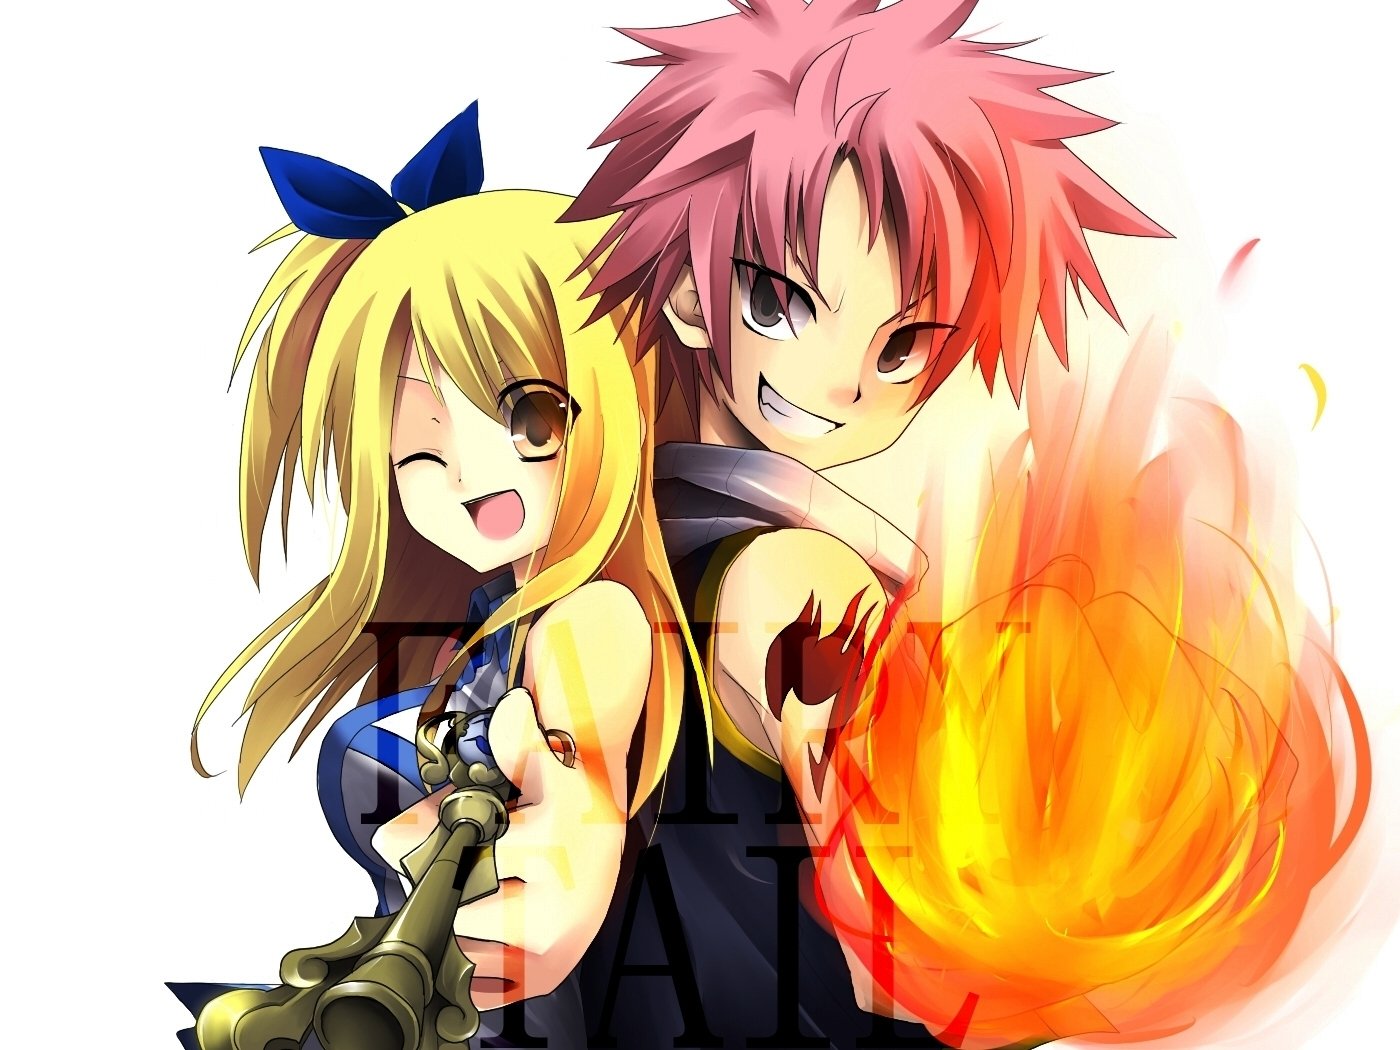 Natsu Dragneel images Lucy and Natsu wallpaper photos 19374099 1400x1050